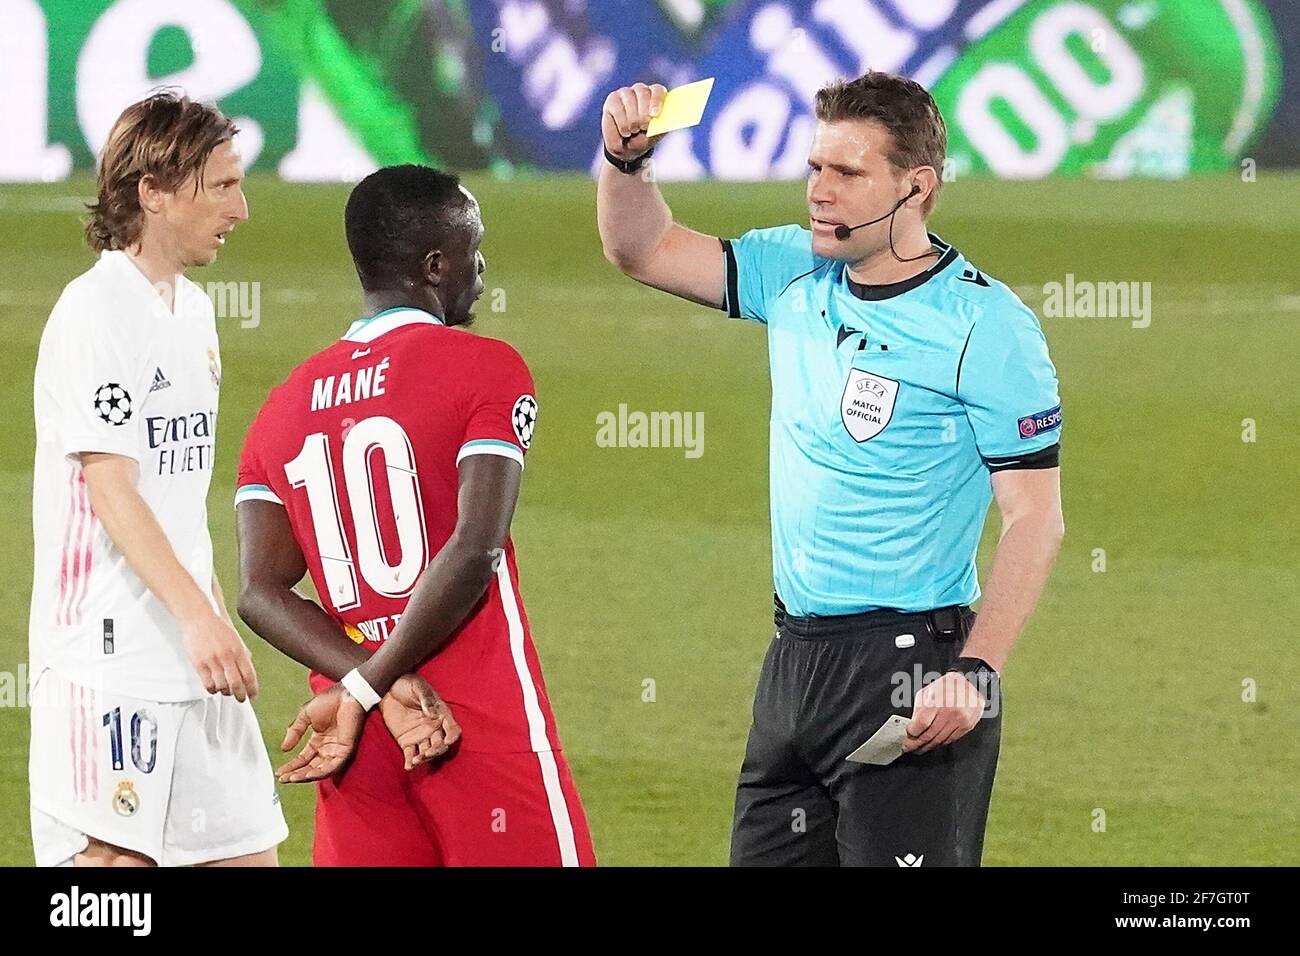 German referee Felix Brych shows yellow card to Liverpool FCs Sadio Mane during UEFA Champions League Quarter-finals 1st leg match